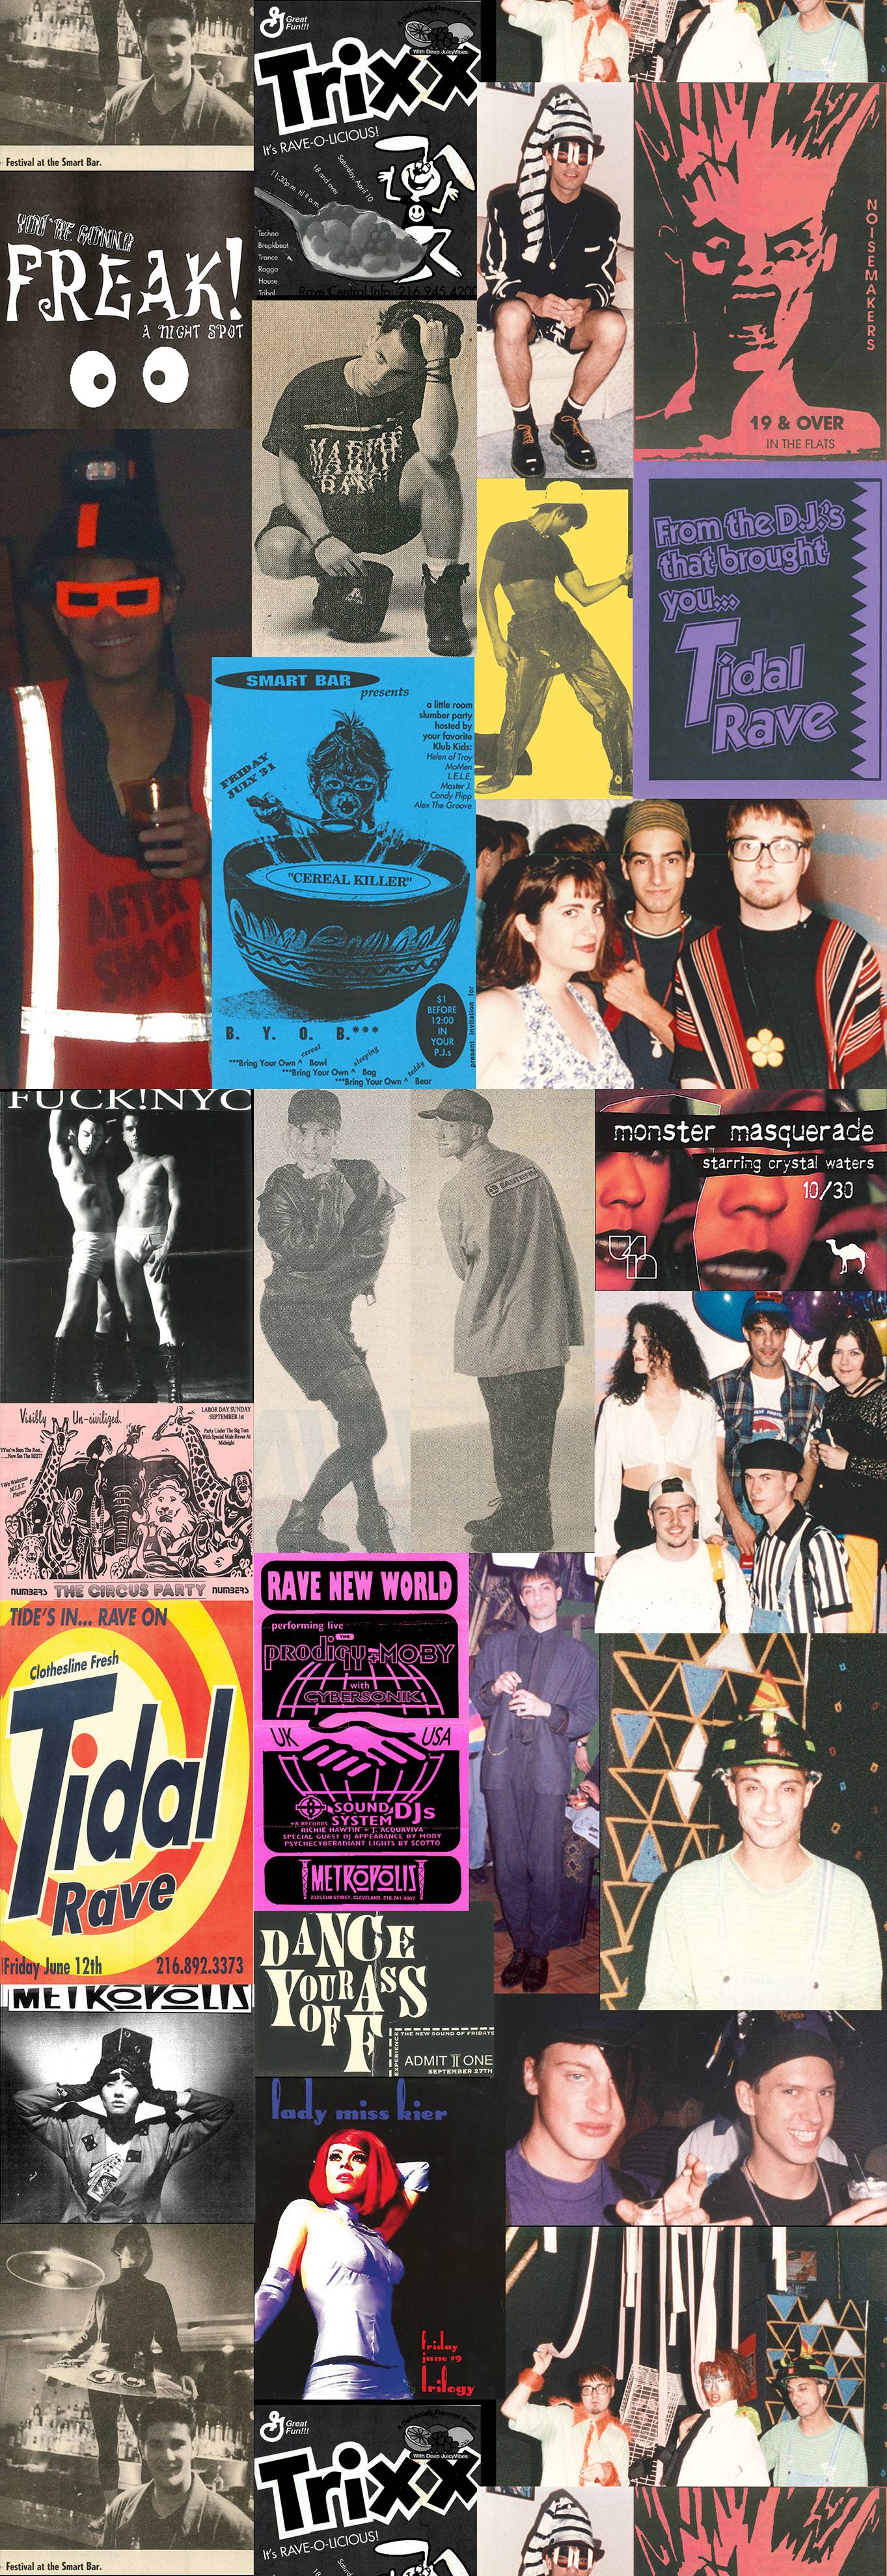 A collage of posters from the 80s and 90s - Rock